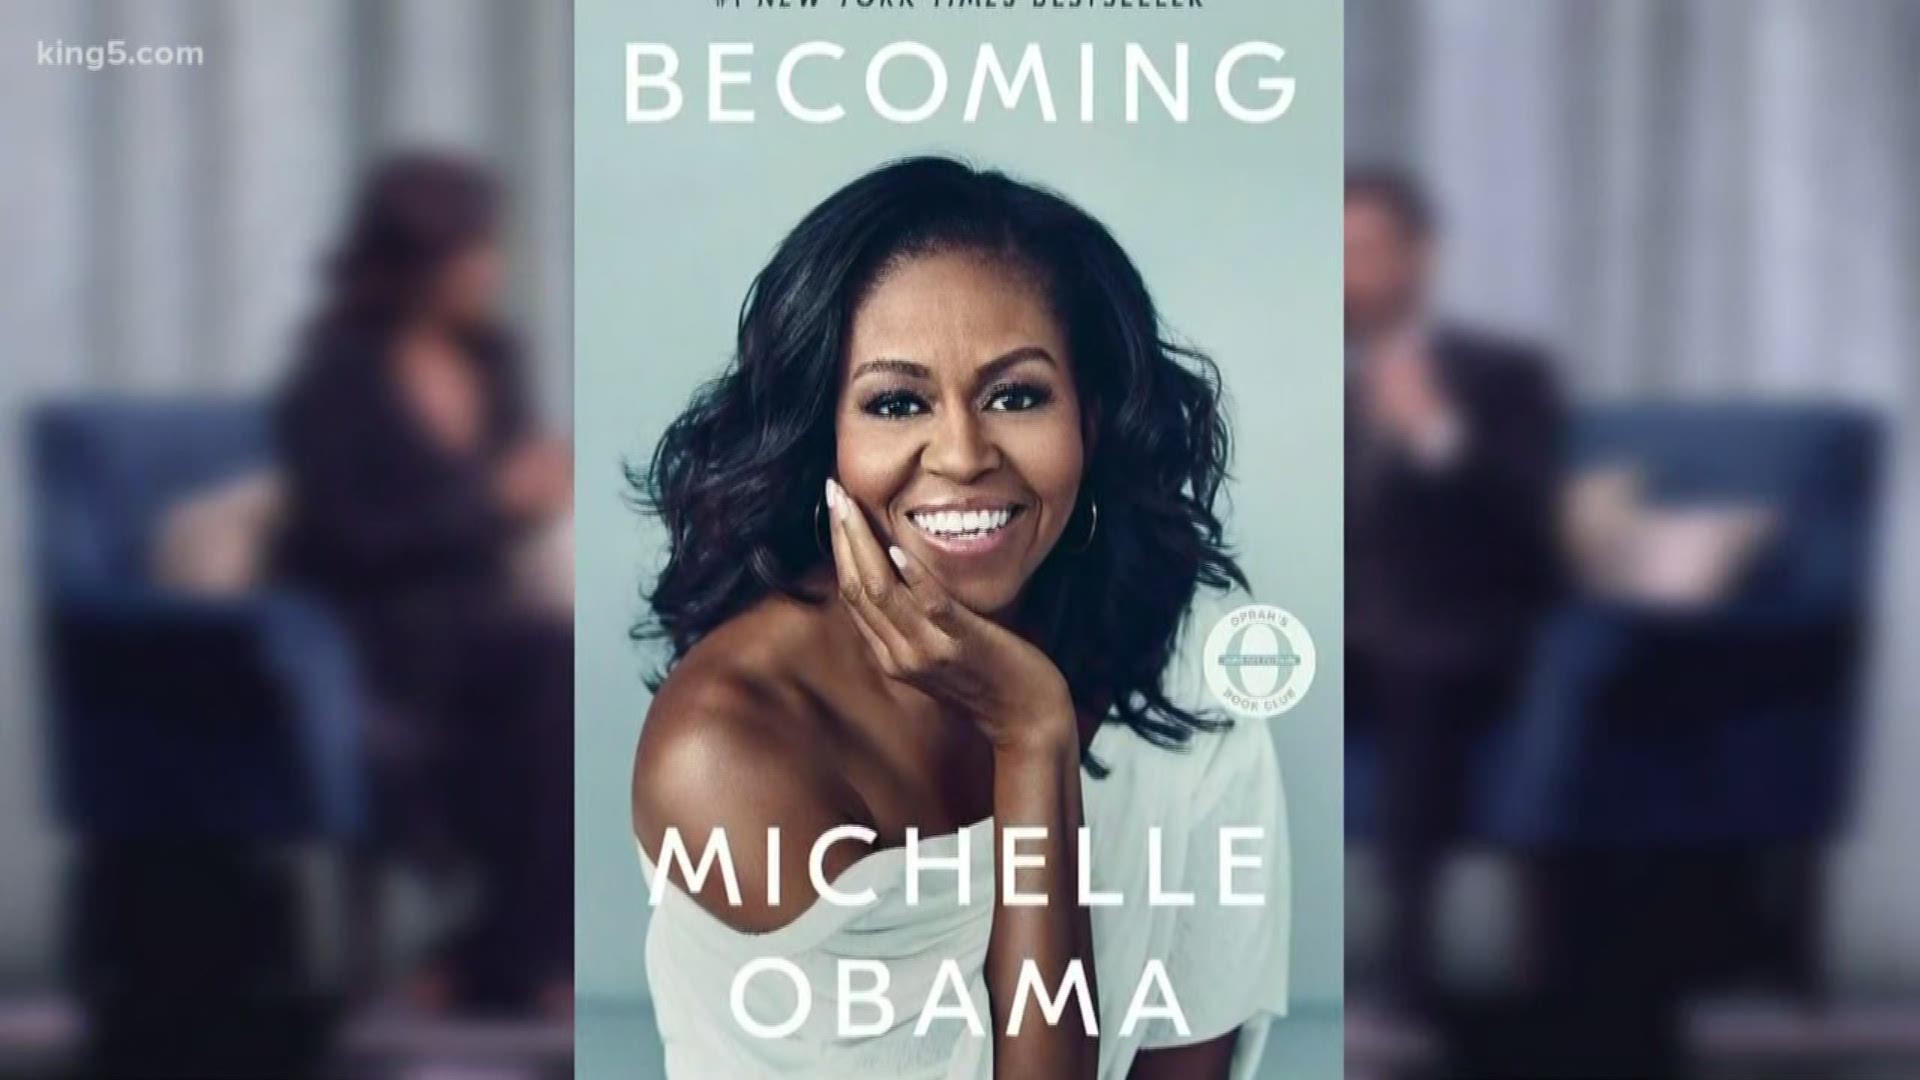 February snowstorms postponed Michelle Obama's scheduled book stop. On Sunday evening she finally made it to the Tacoma Dome.